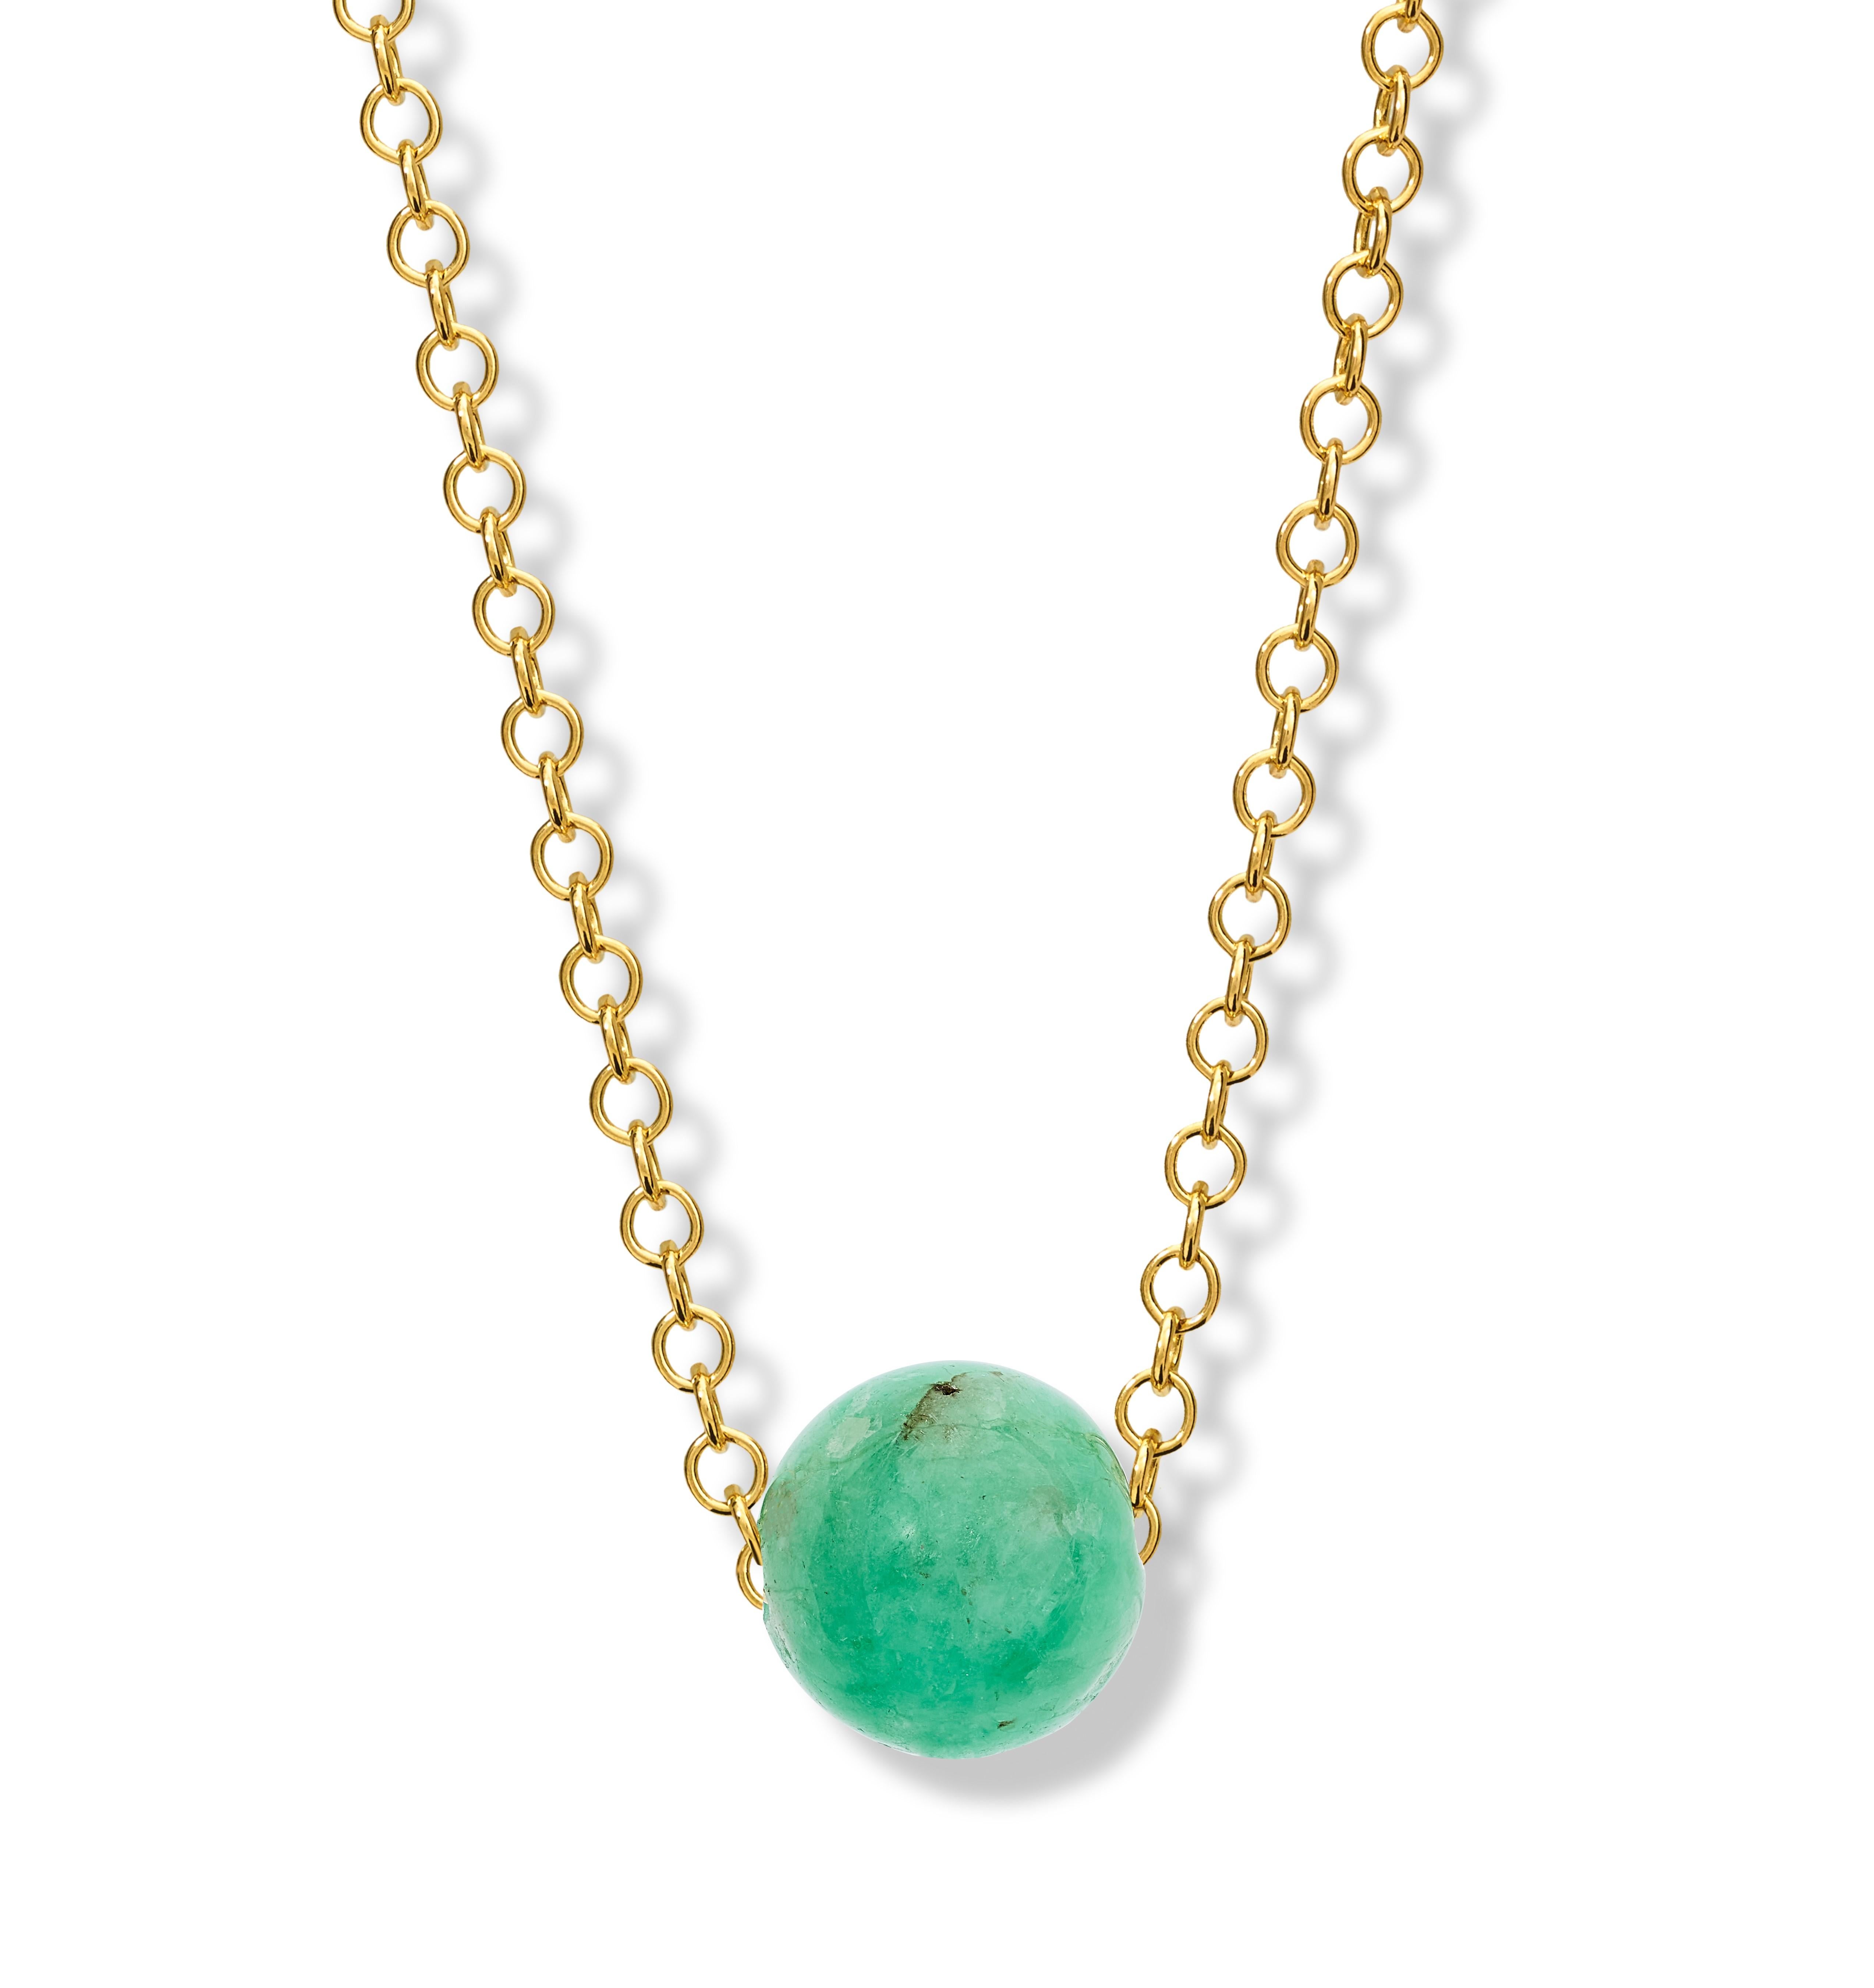 Pelota necklace in 9 carat yellow gold with an emerald 10mm bead. The bead is on a 16